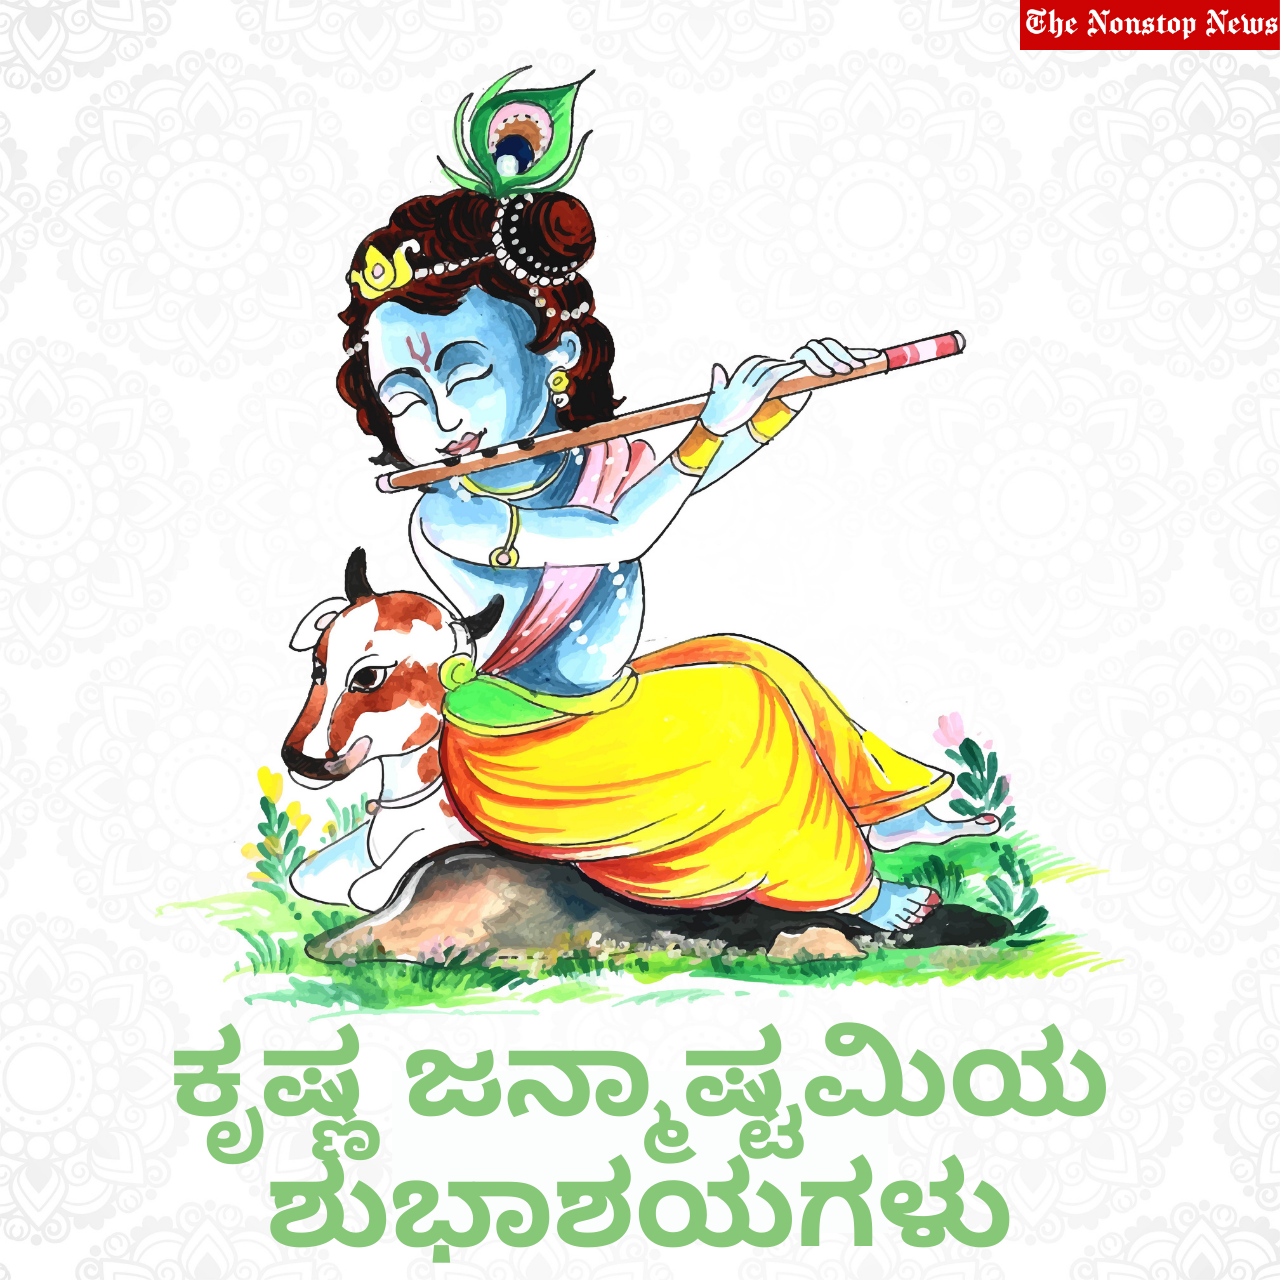 Happy Krishna Janmashtami 2021 Kannada Wishes, Messages, Quotes, HD Images, Messages, Greetings, Facebook, and WhatsApp Status